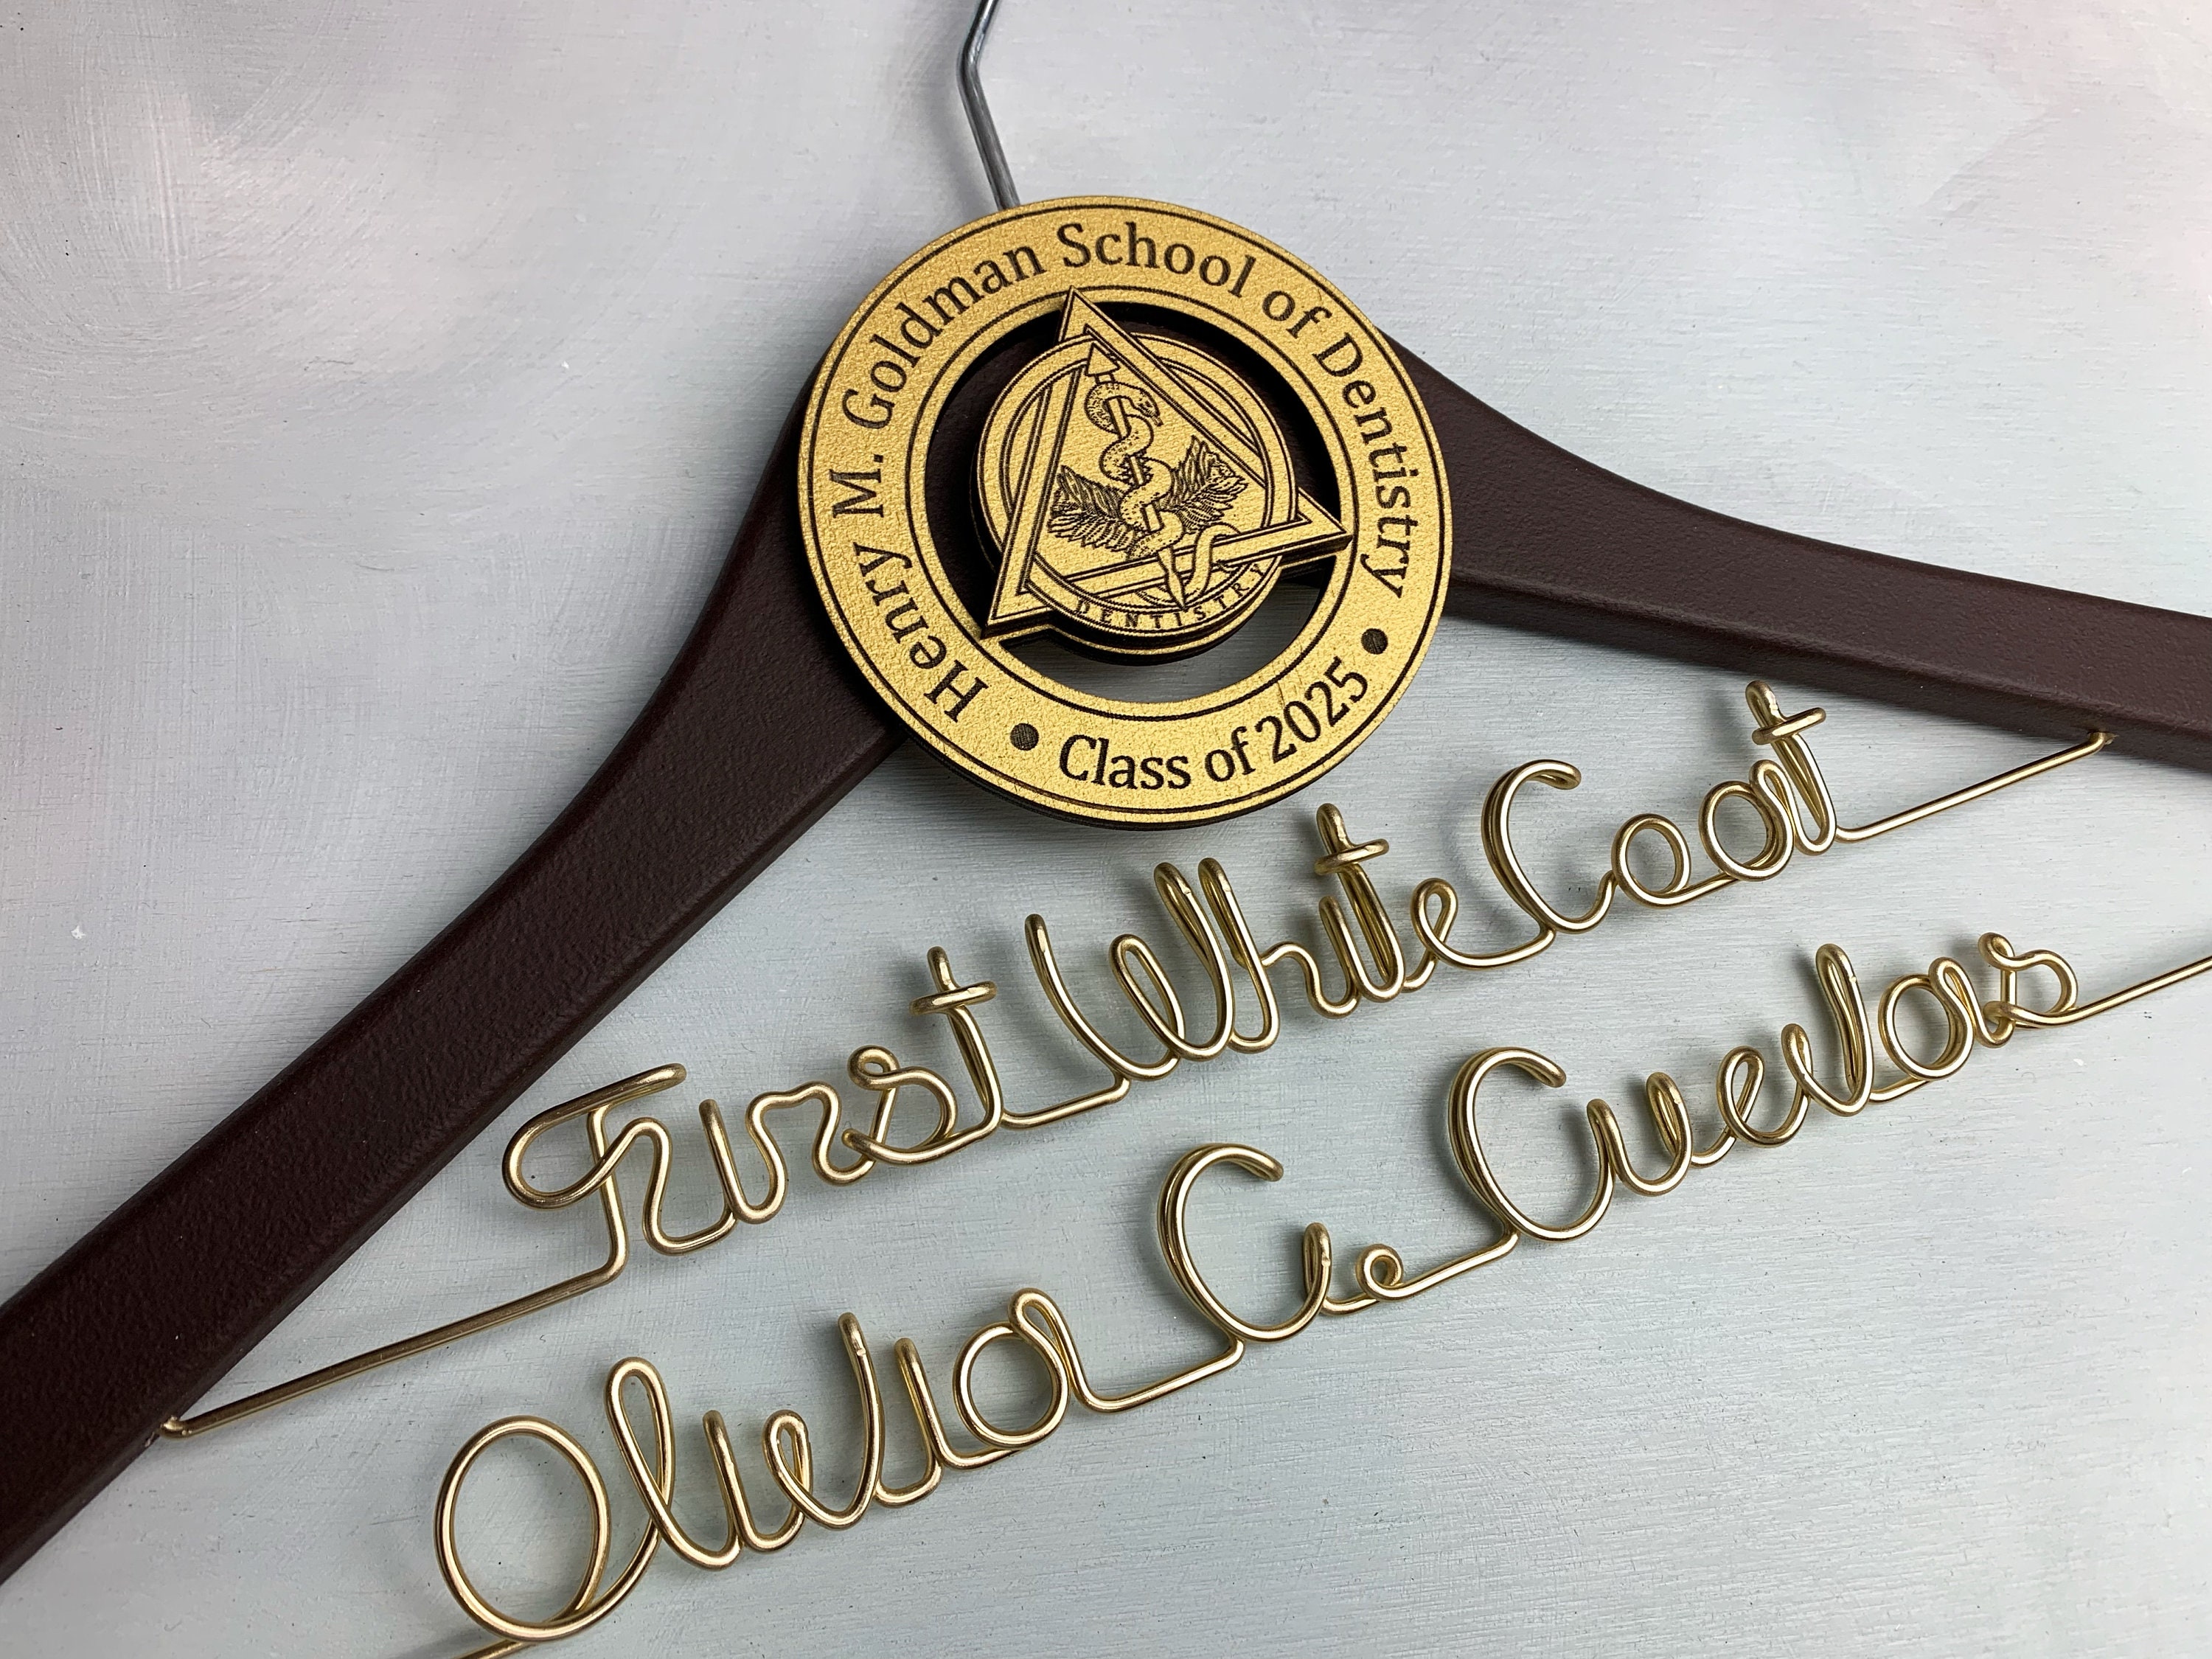 Police Academy Graduation Gifts, Personalized Police Officer Gifts, Cop  Gifts, Gifts for Law Enforcement, Judge Hanger, Law School Grad Gift 